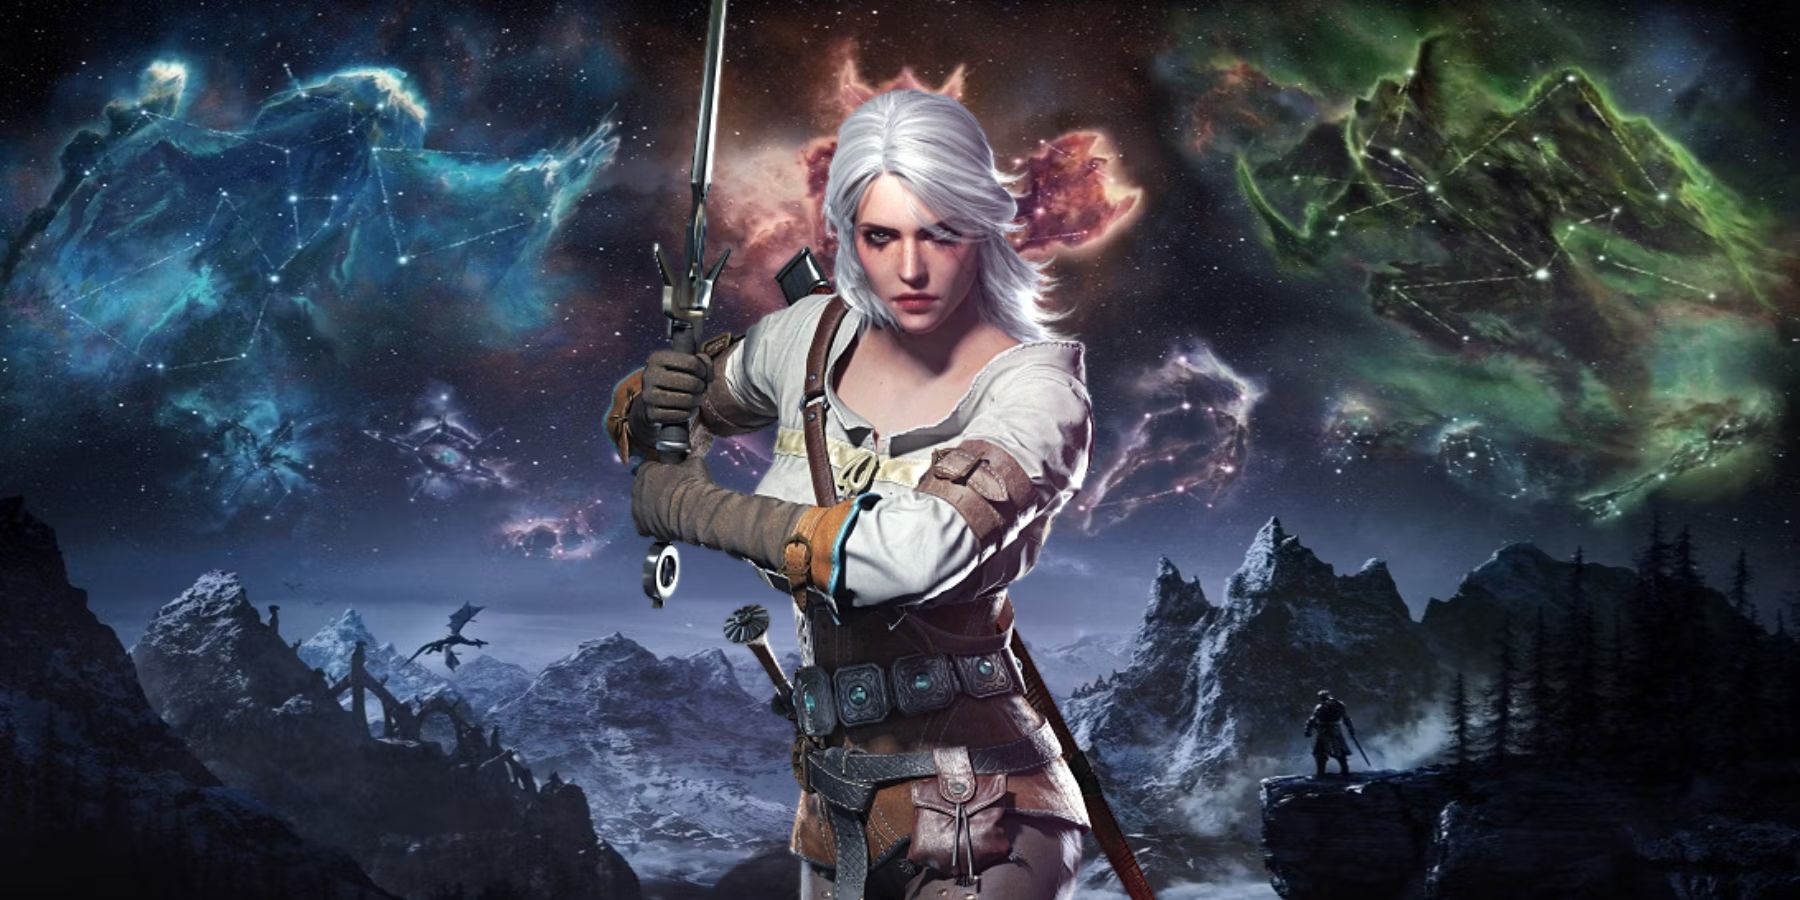 Skyrim Mod Brings The Voice of Witcher 3's Ciri To The Game